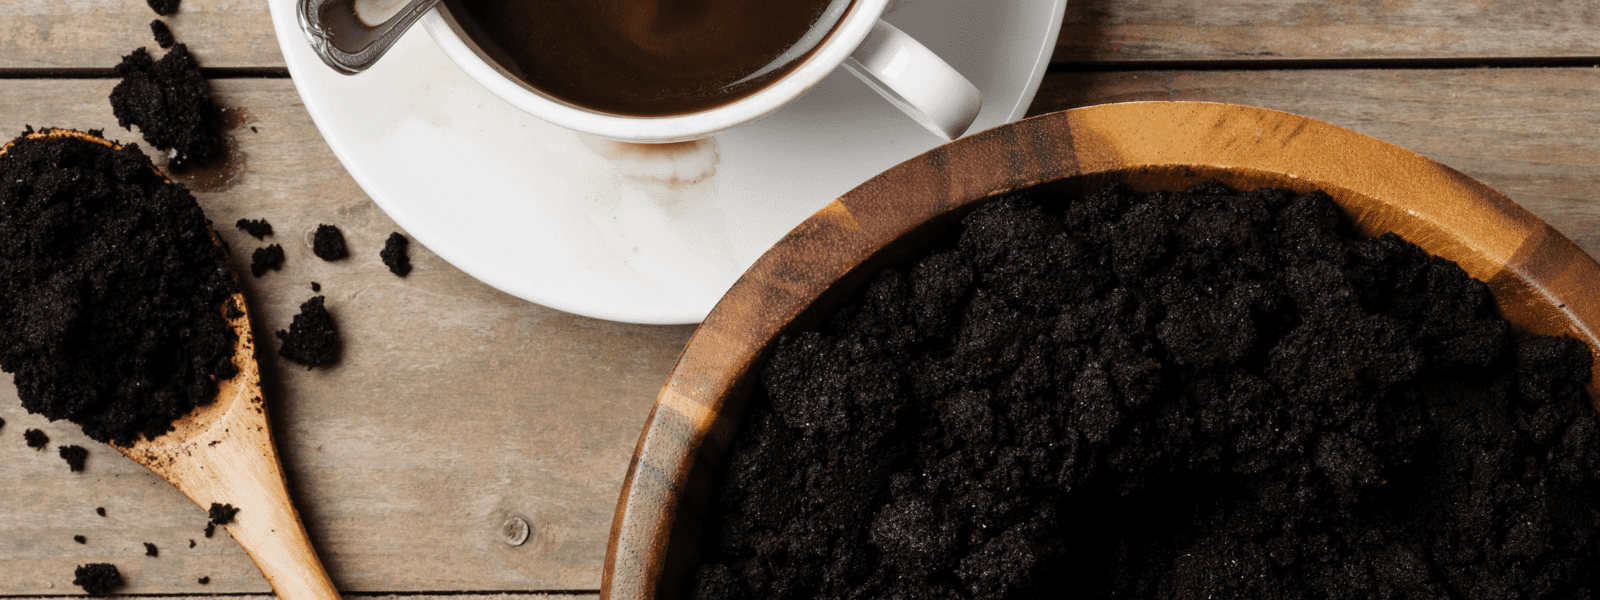 11 Amazing Ideas to Recycle Used Coffee Grounds